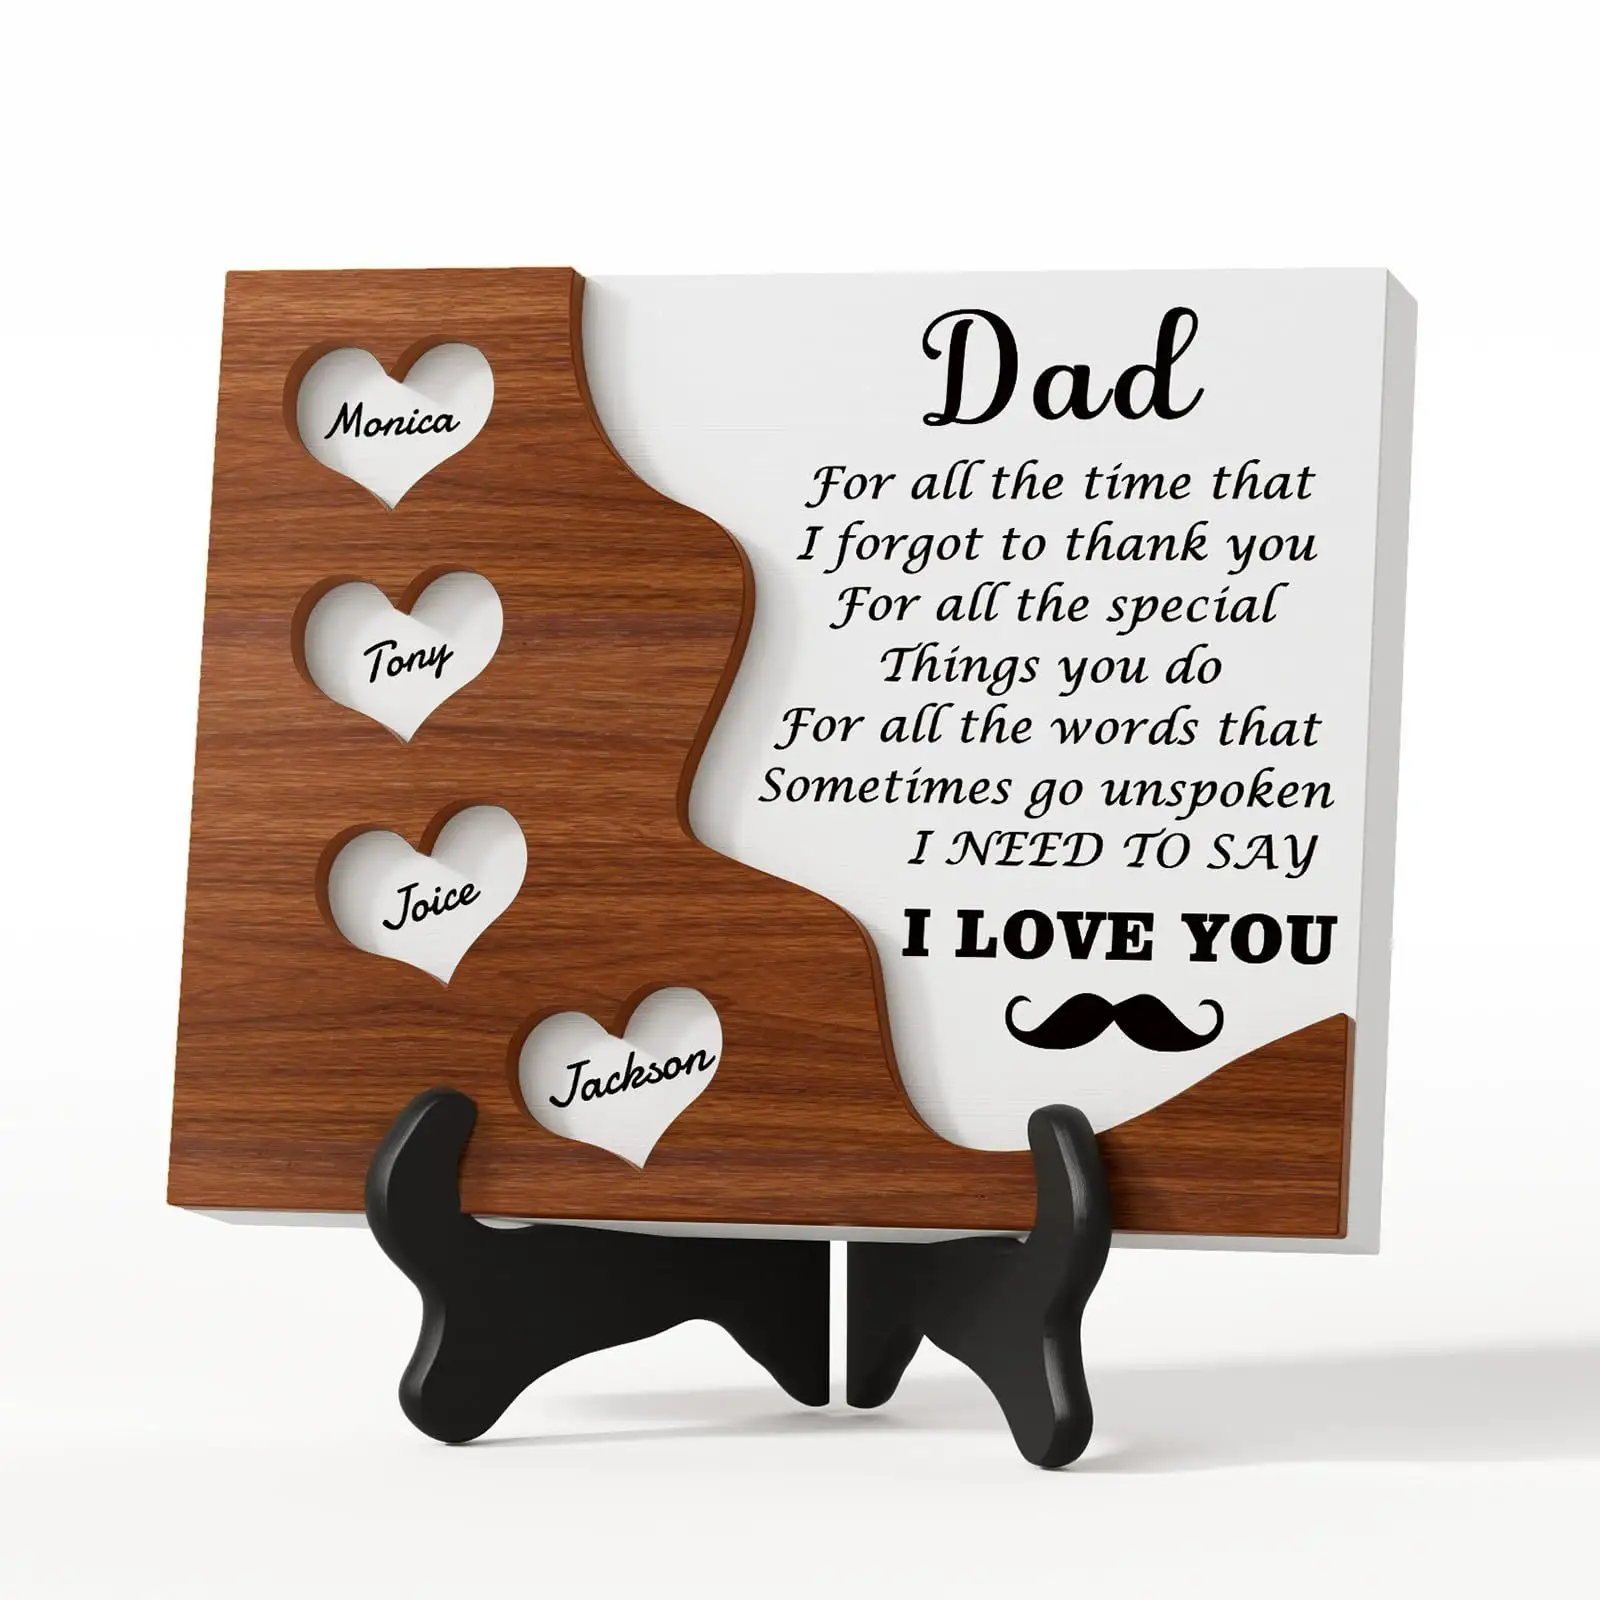 Customized Name Wooden Crafts Gift Wood Craft 3D Carved Ornament Gift for Dad Mom Desk Home Decoration